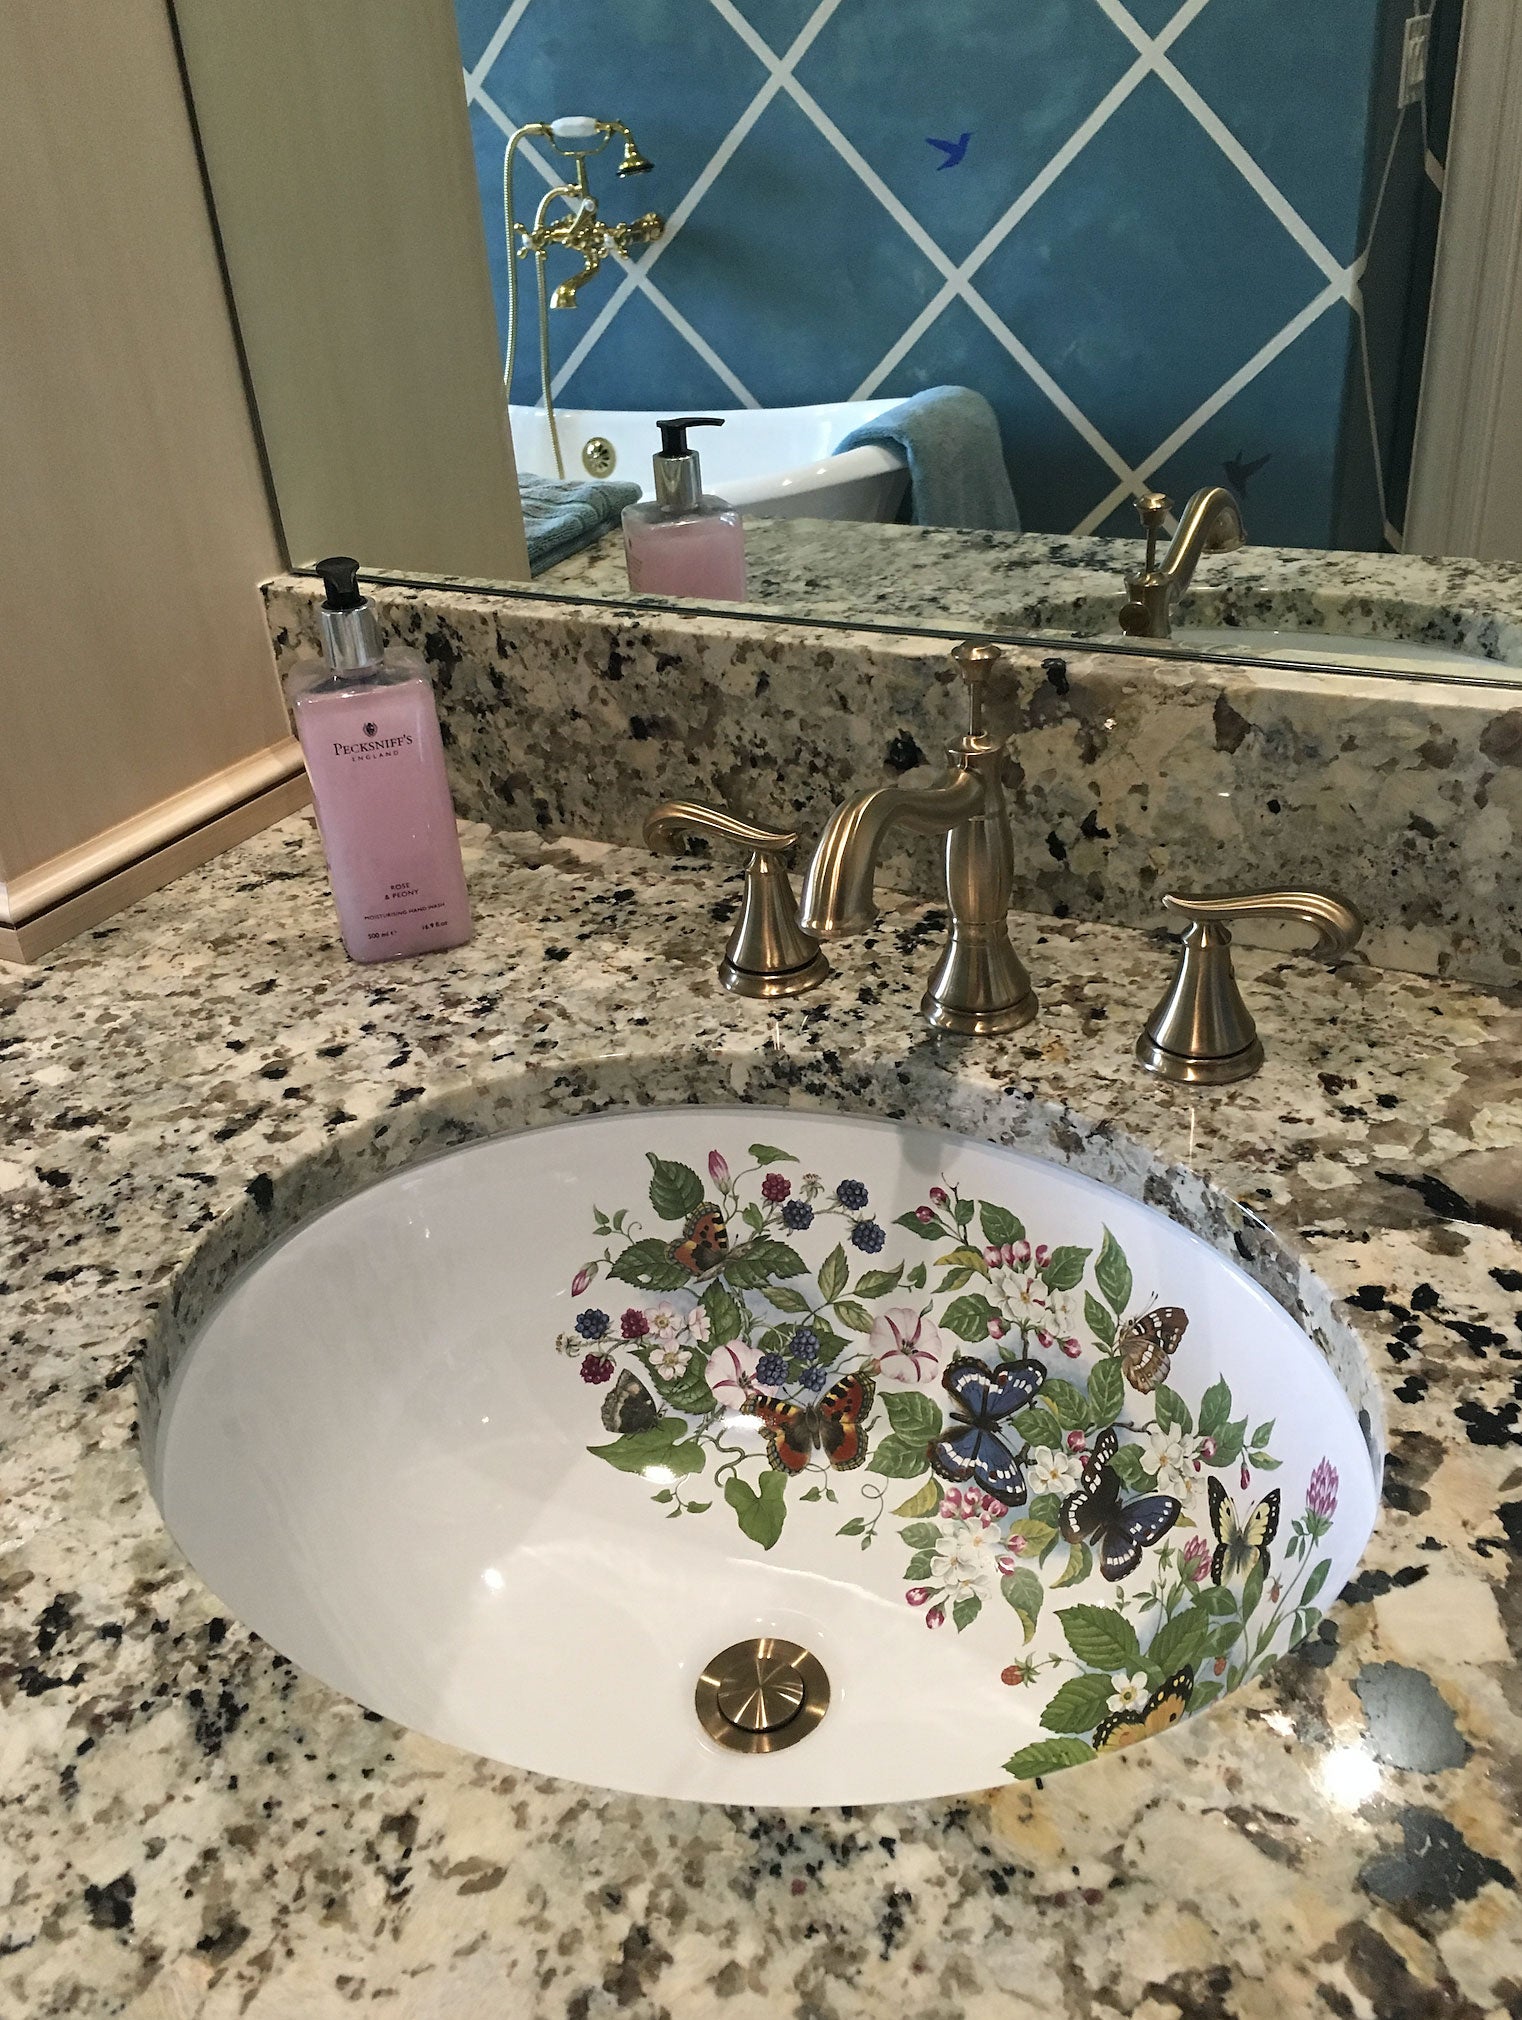 Unique bathroom with granite counter and butterflies, fruit and flowers painted bathroom sink.